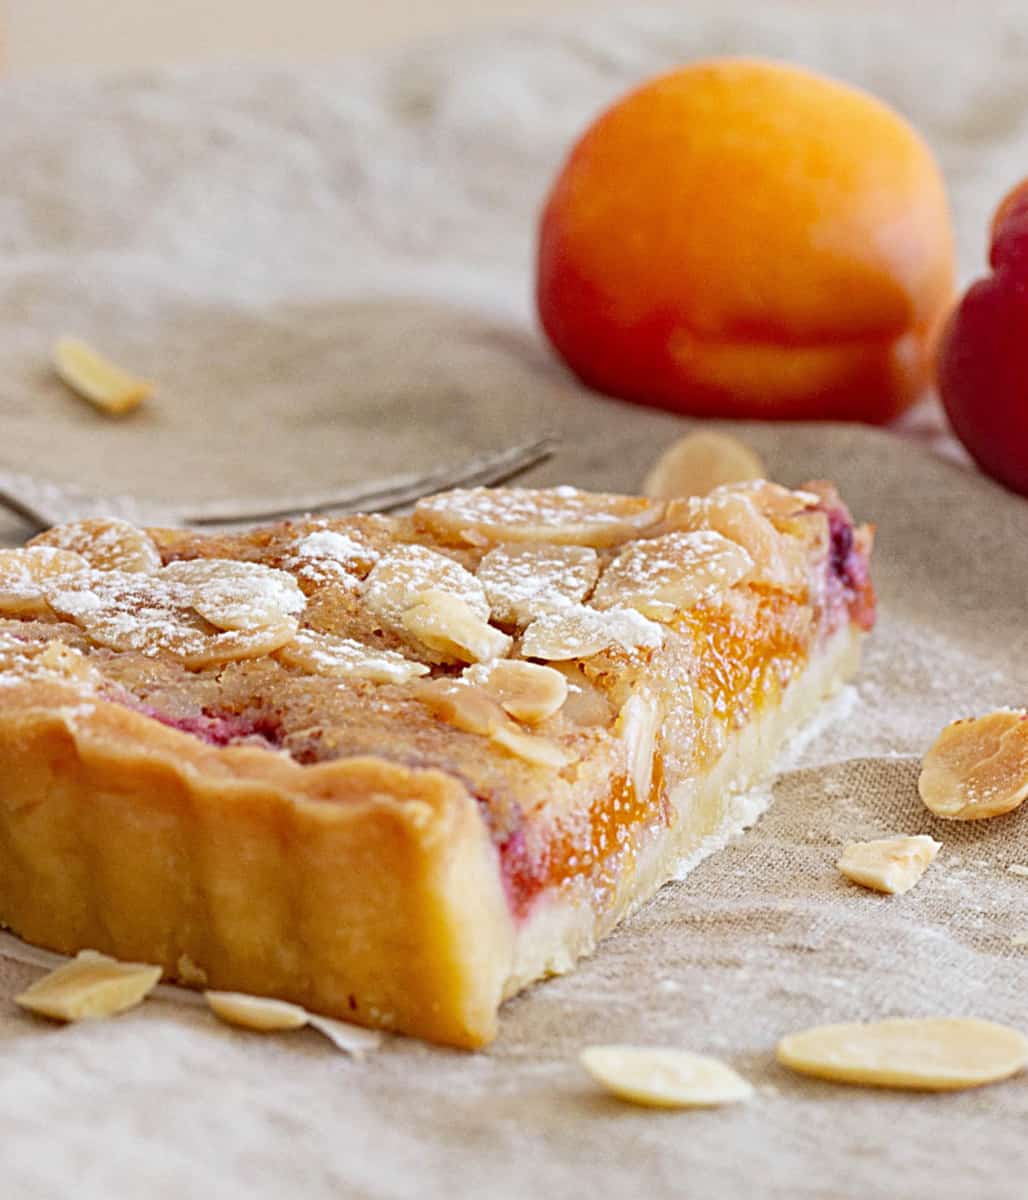 Slice of apricot tart on beige cloth, whole apricots, loose almonds.